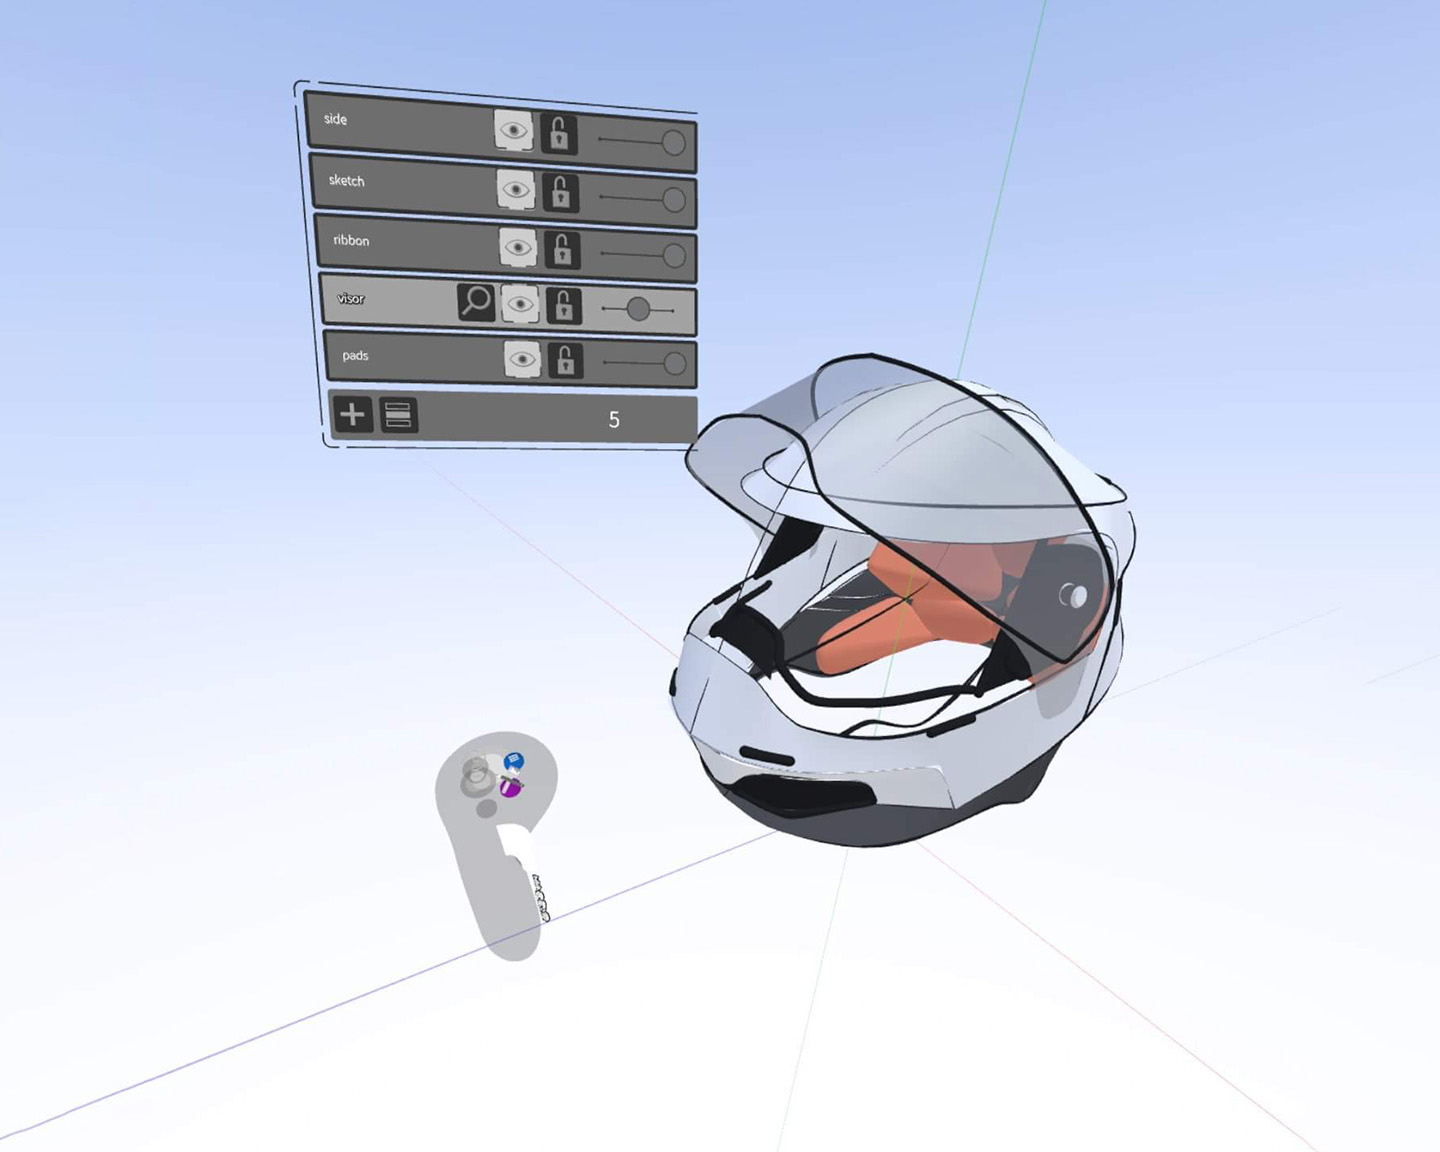 Sketching a helmet in the Gravity Sketch virtual reality environment